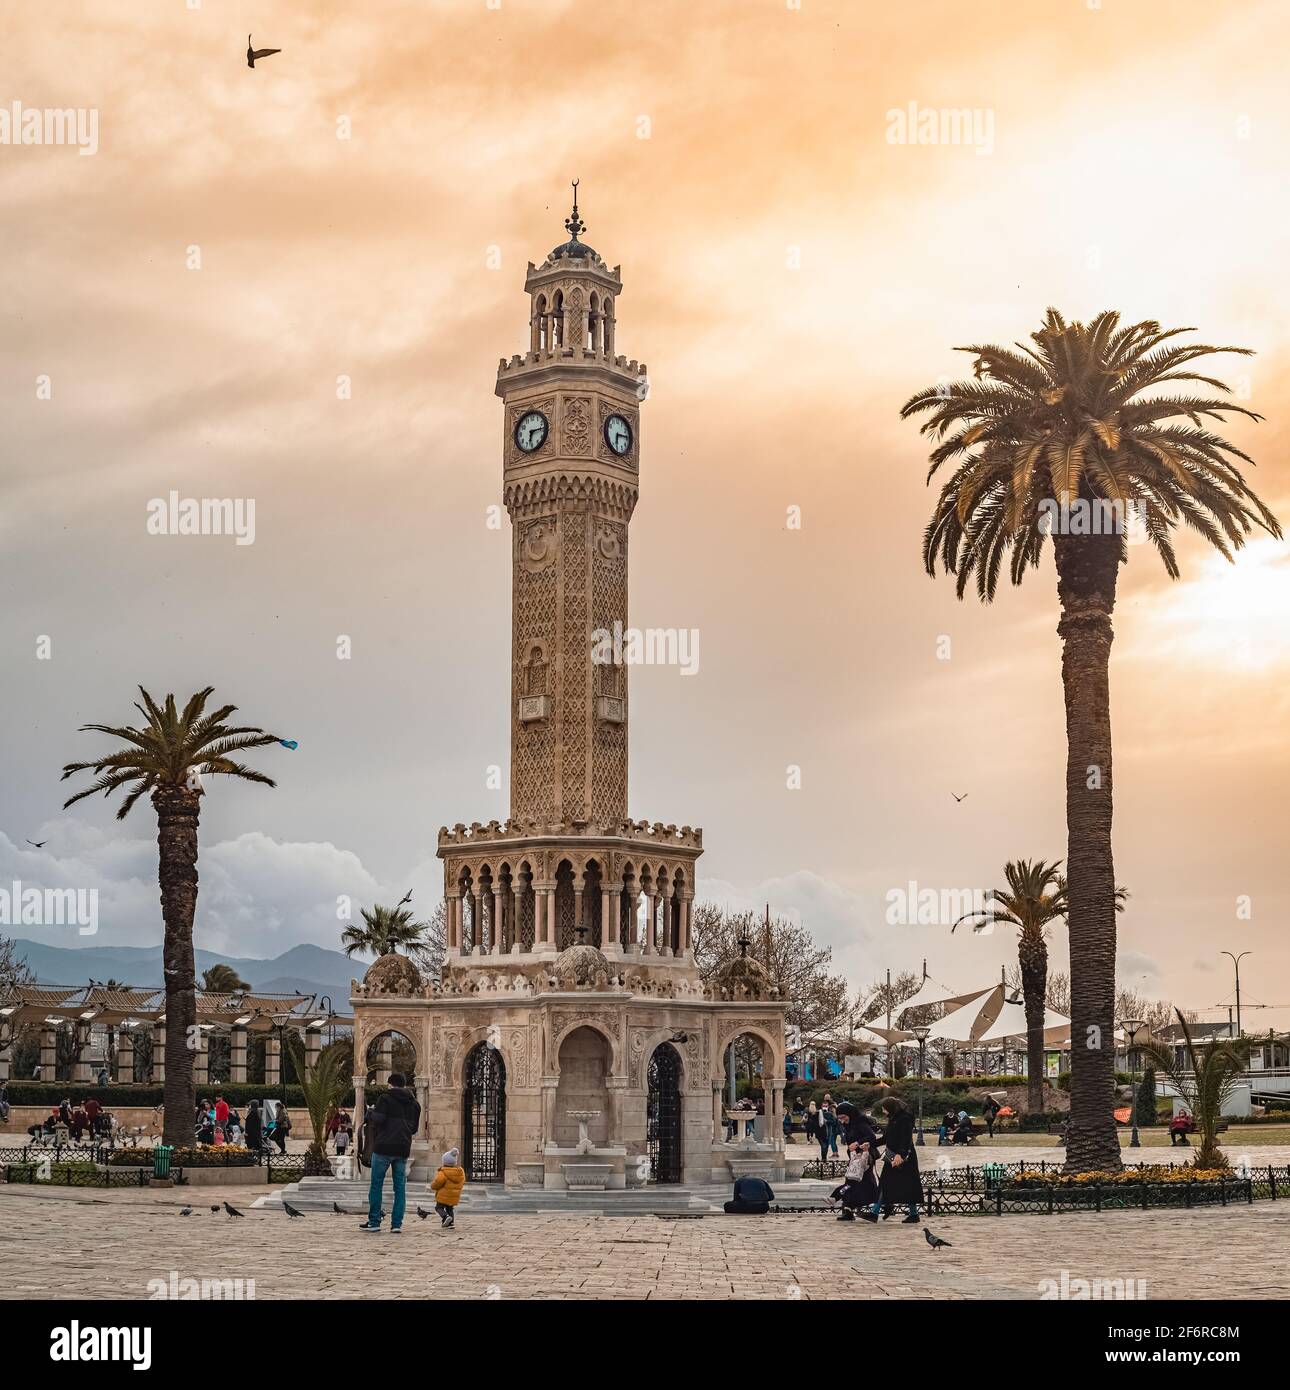 Izmir, Turkey - March 23 2021: Izmir Clock Tower in Konak square. Famous  place. Sunset colors Stock Photo - Alamy